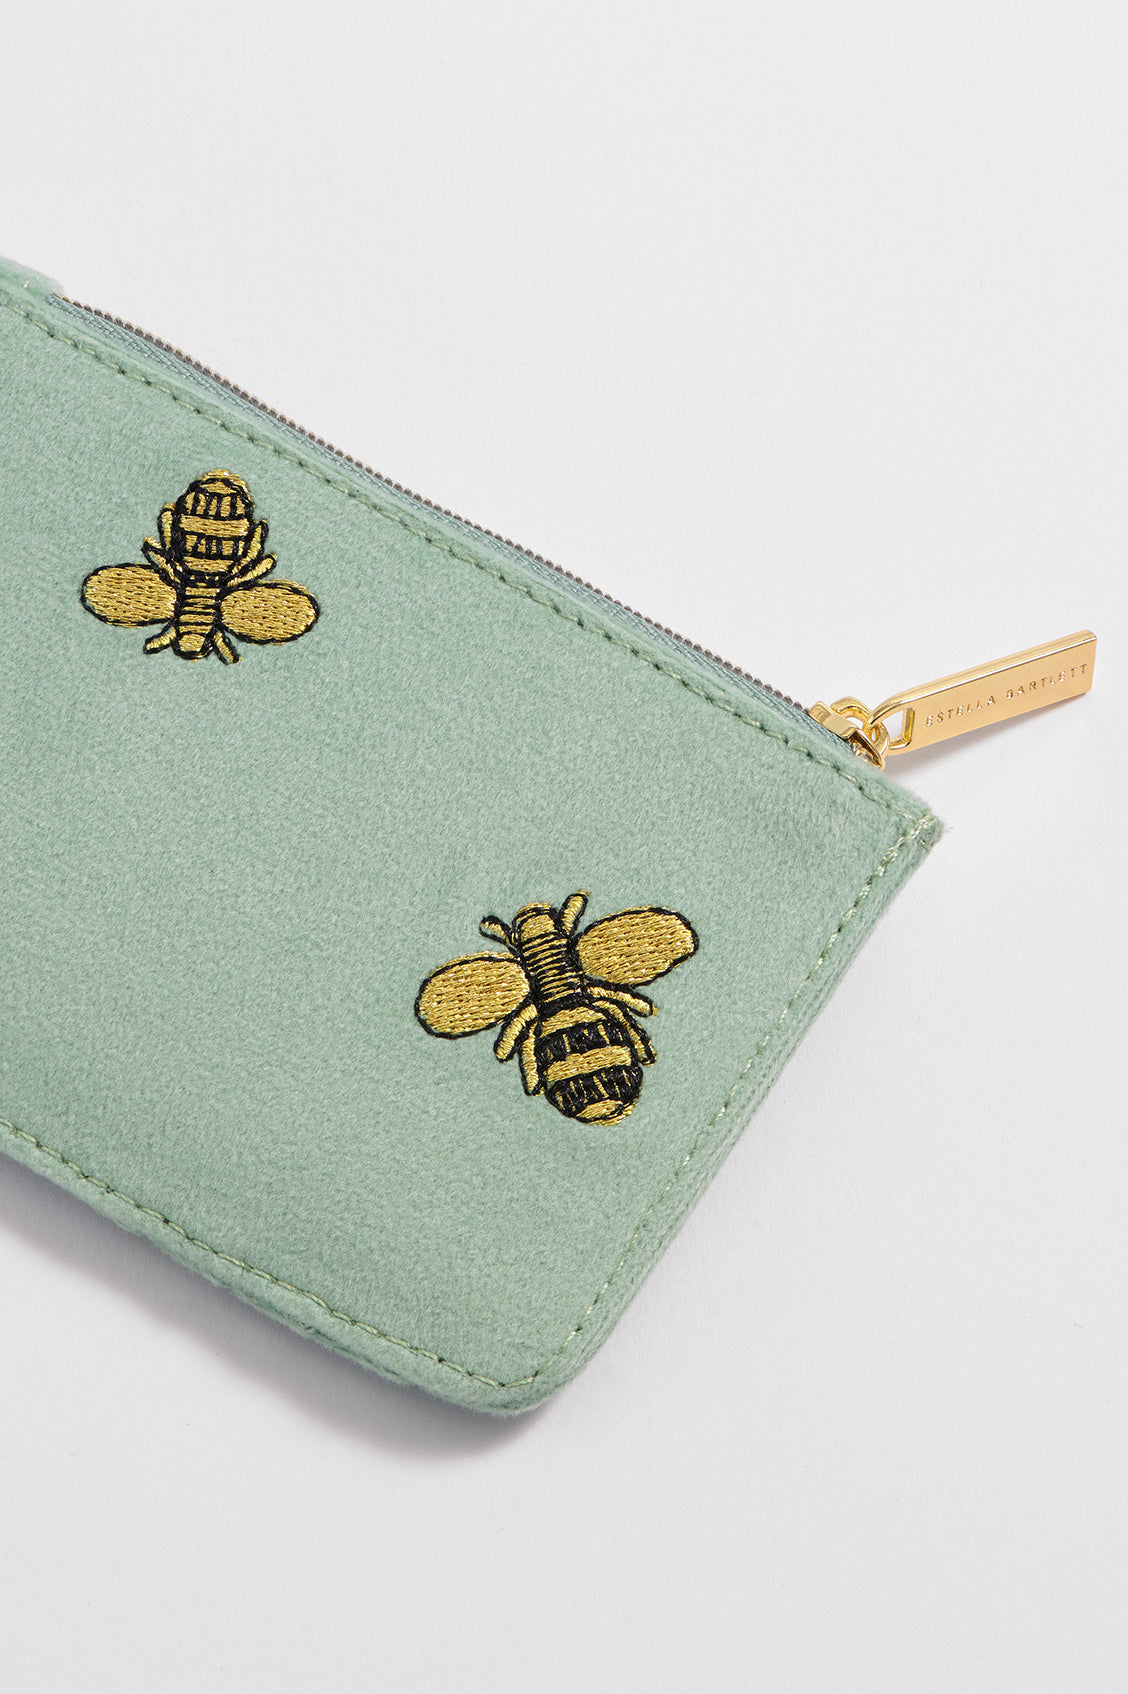 Embroidered Bees Card Purse